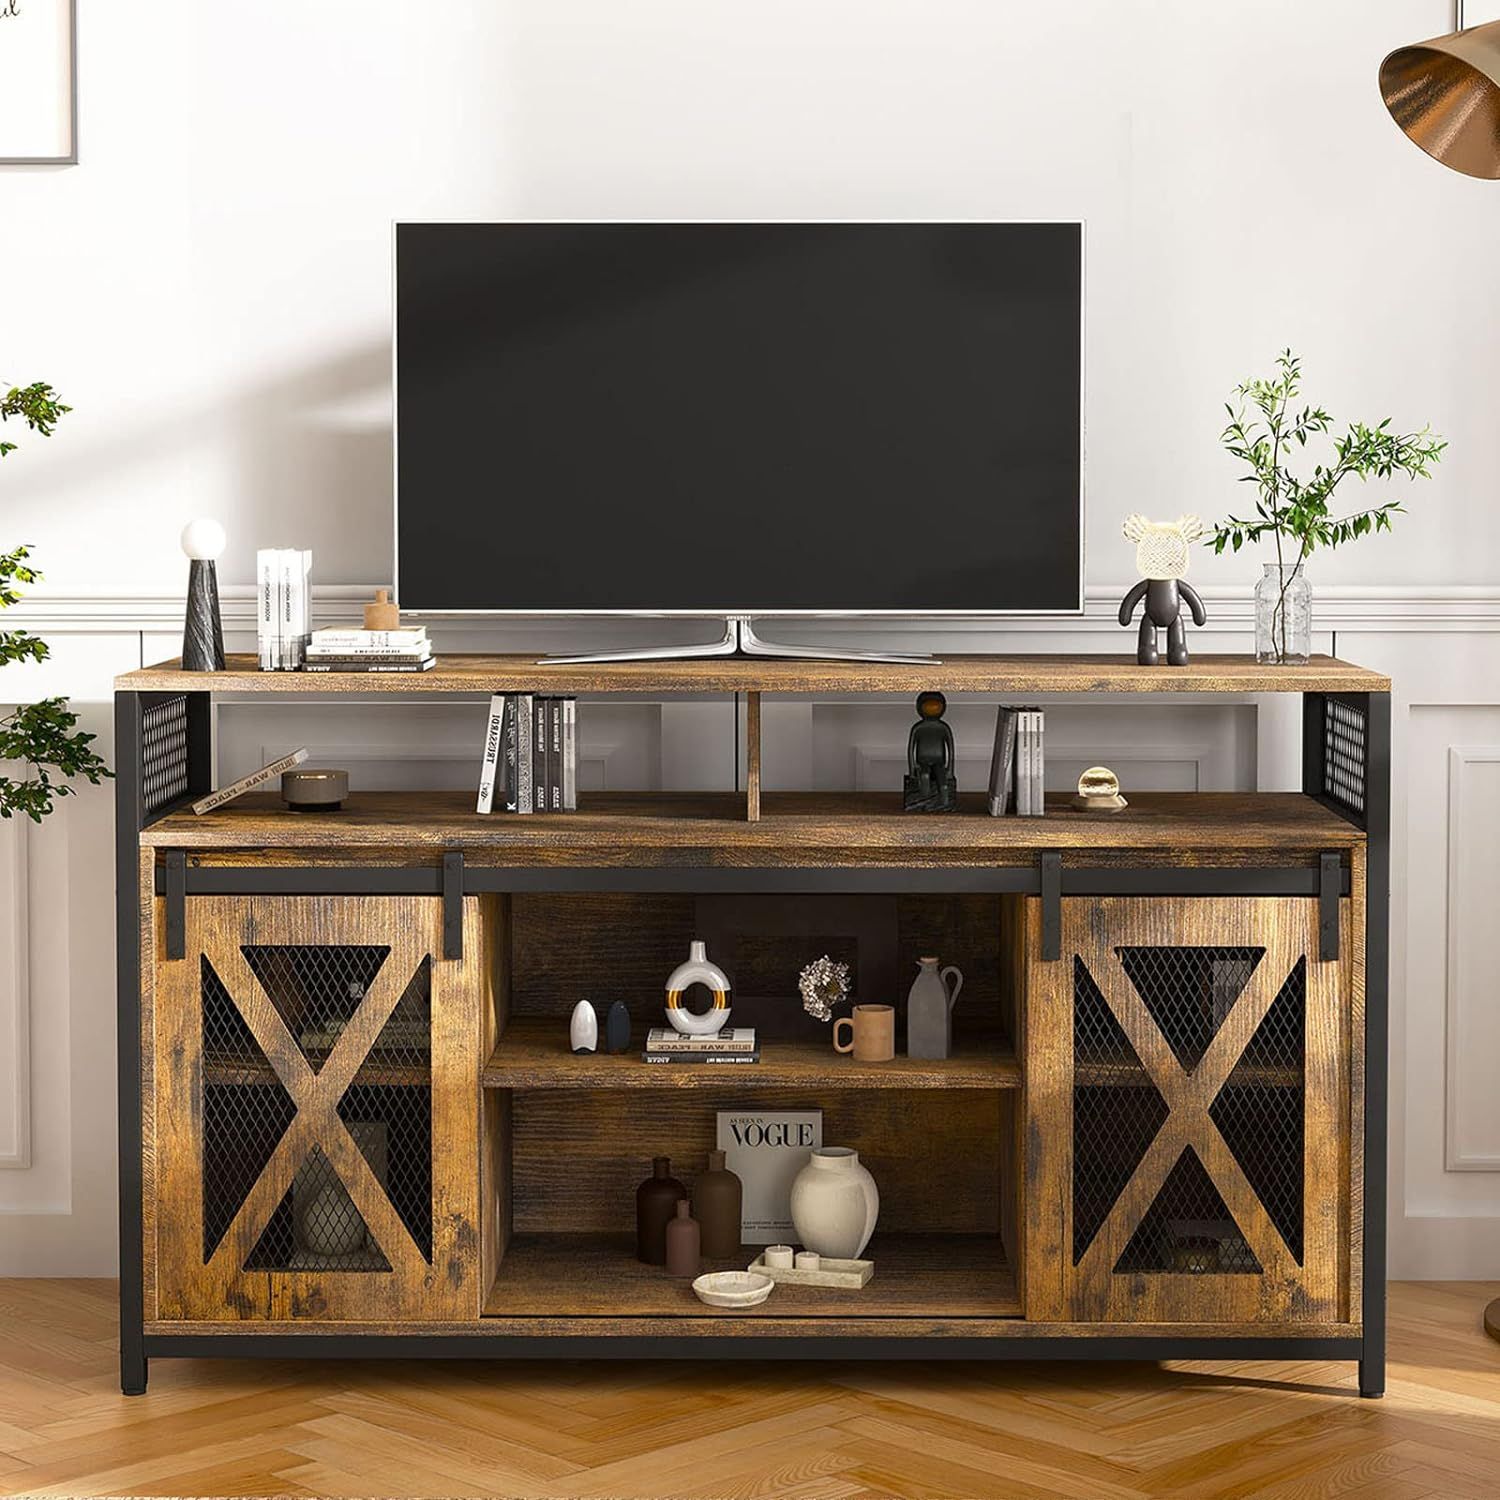 Nolany Tv Stand With Sliding Barn Doors, India | Ubuy With Regard To Barn Door Media Tv Stands (View 10 of 15)